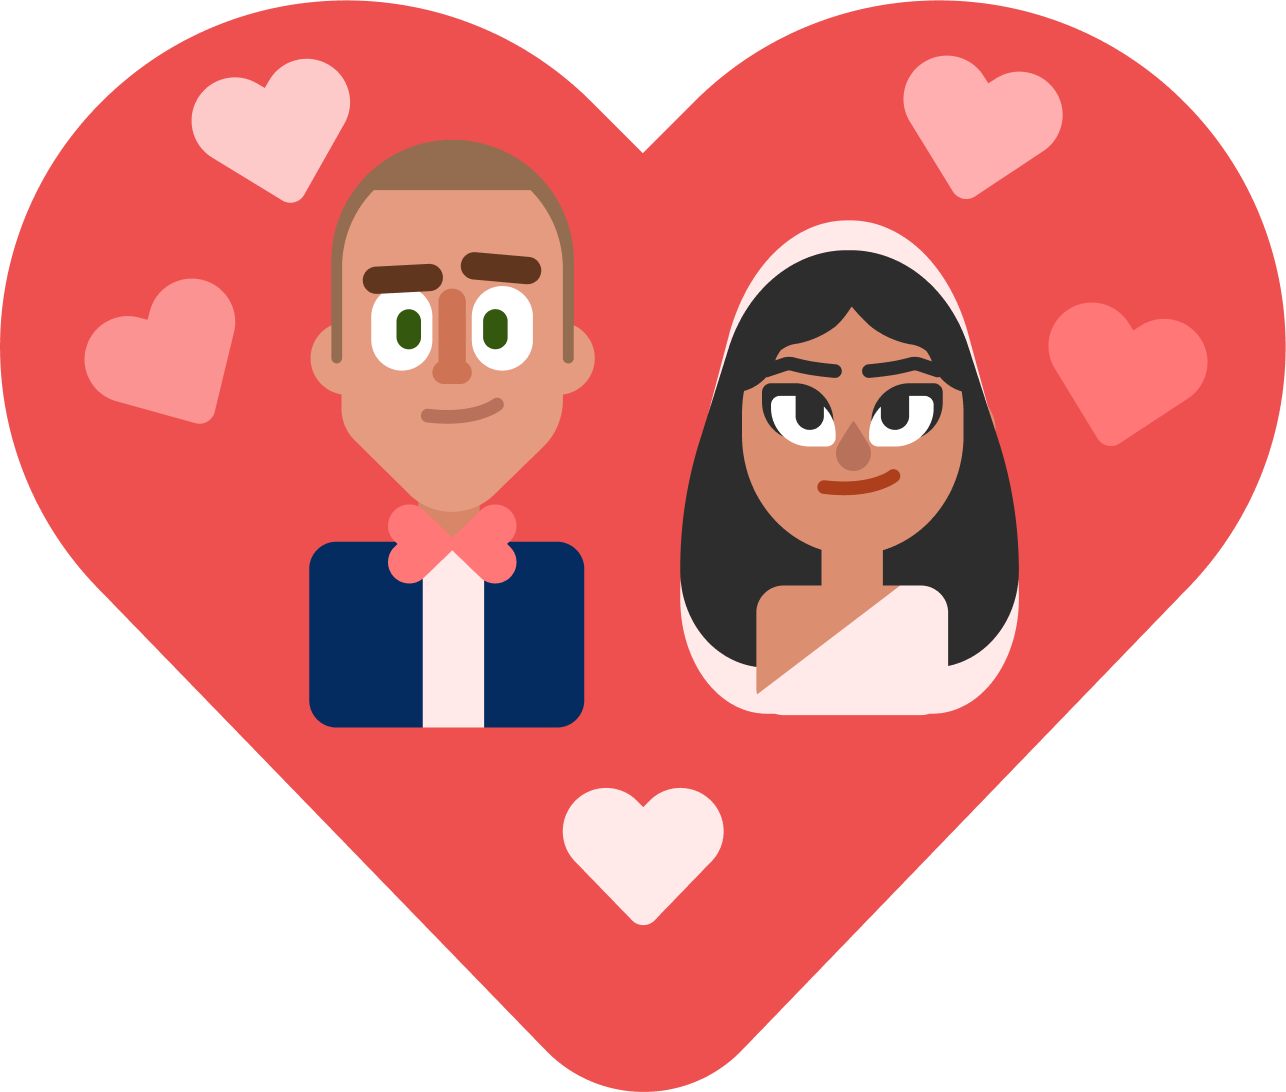 A heart with an illustration of two people inside: a groom on the left and a bride on the right.